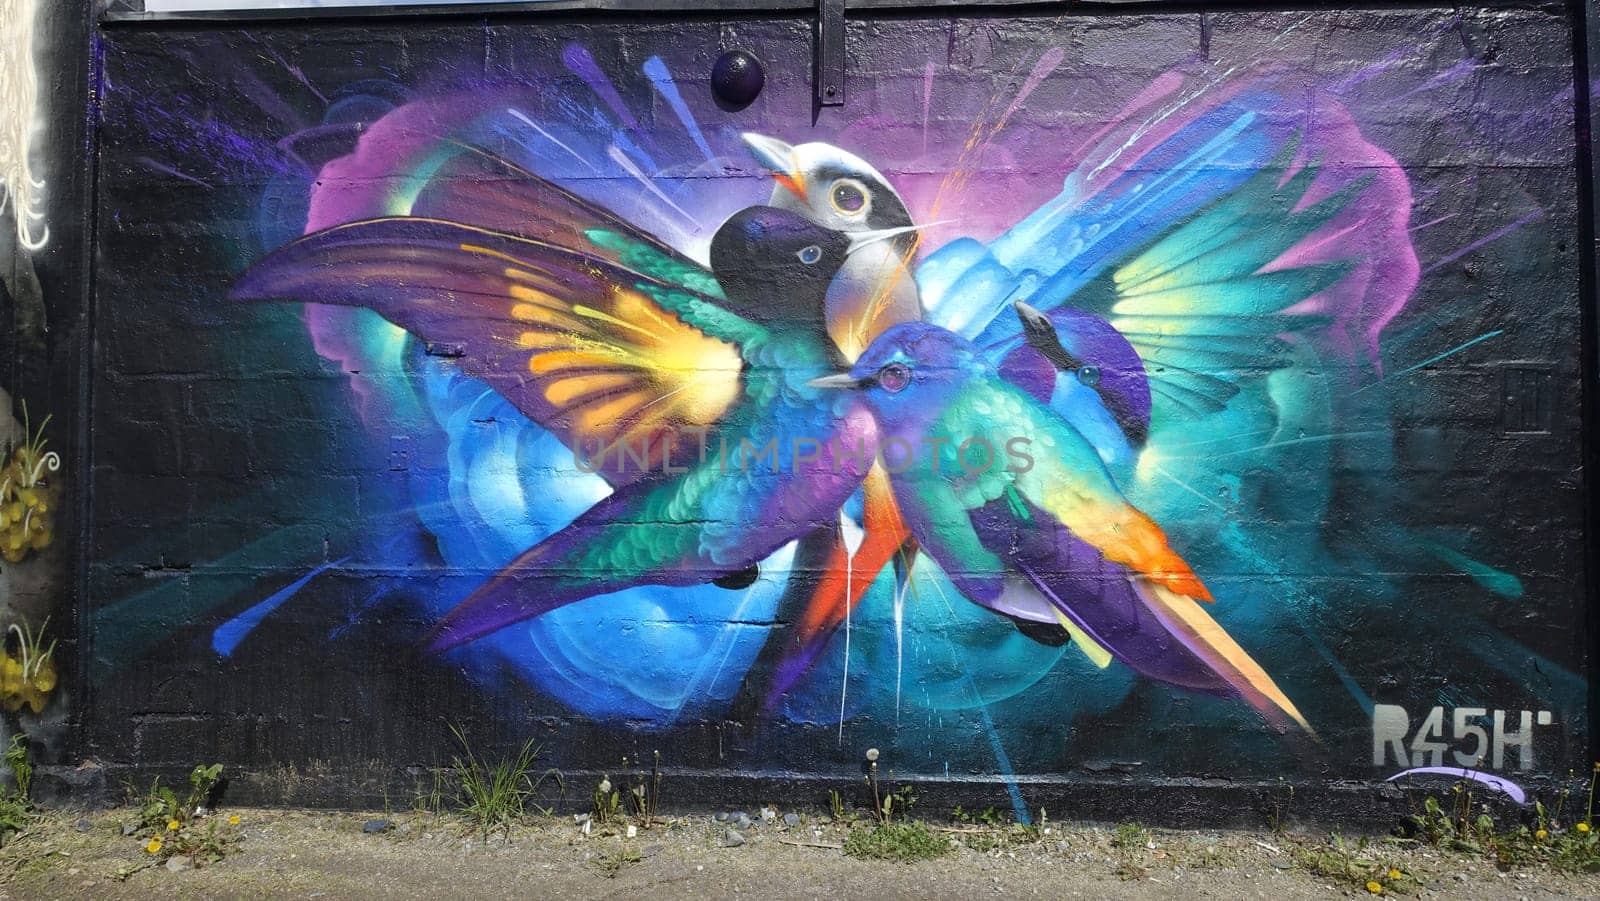 Stockholm, Snosatra, Sweden, May 23 2021. Graffiti exhibition on the outskirts of the city. Birds.